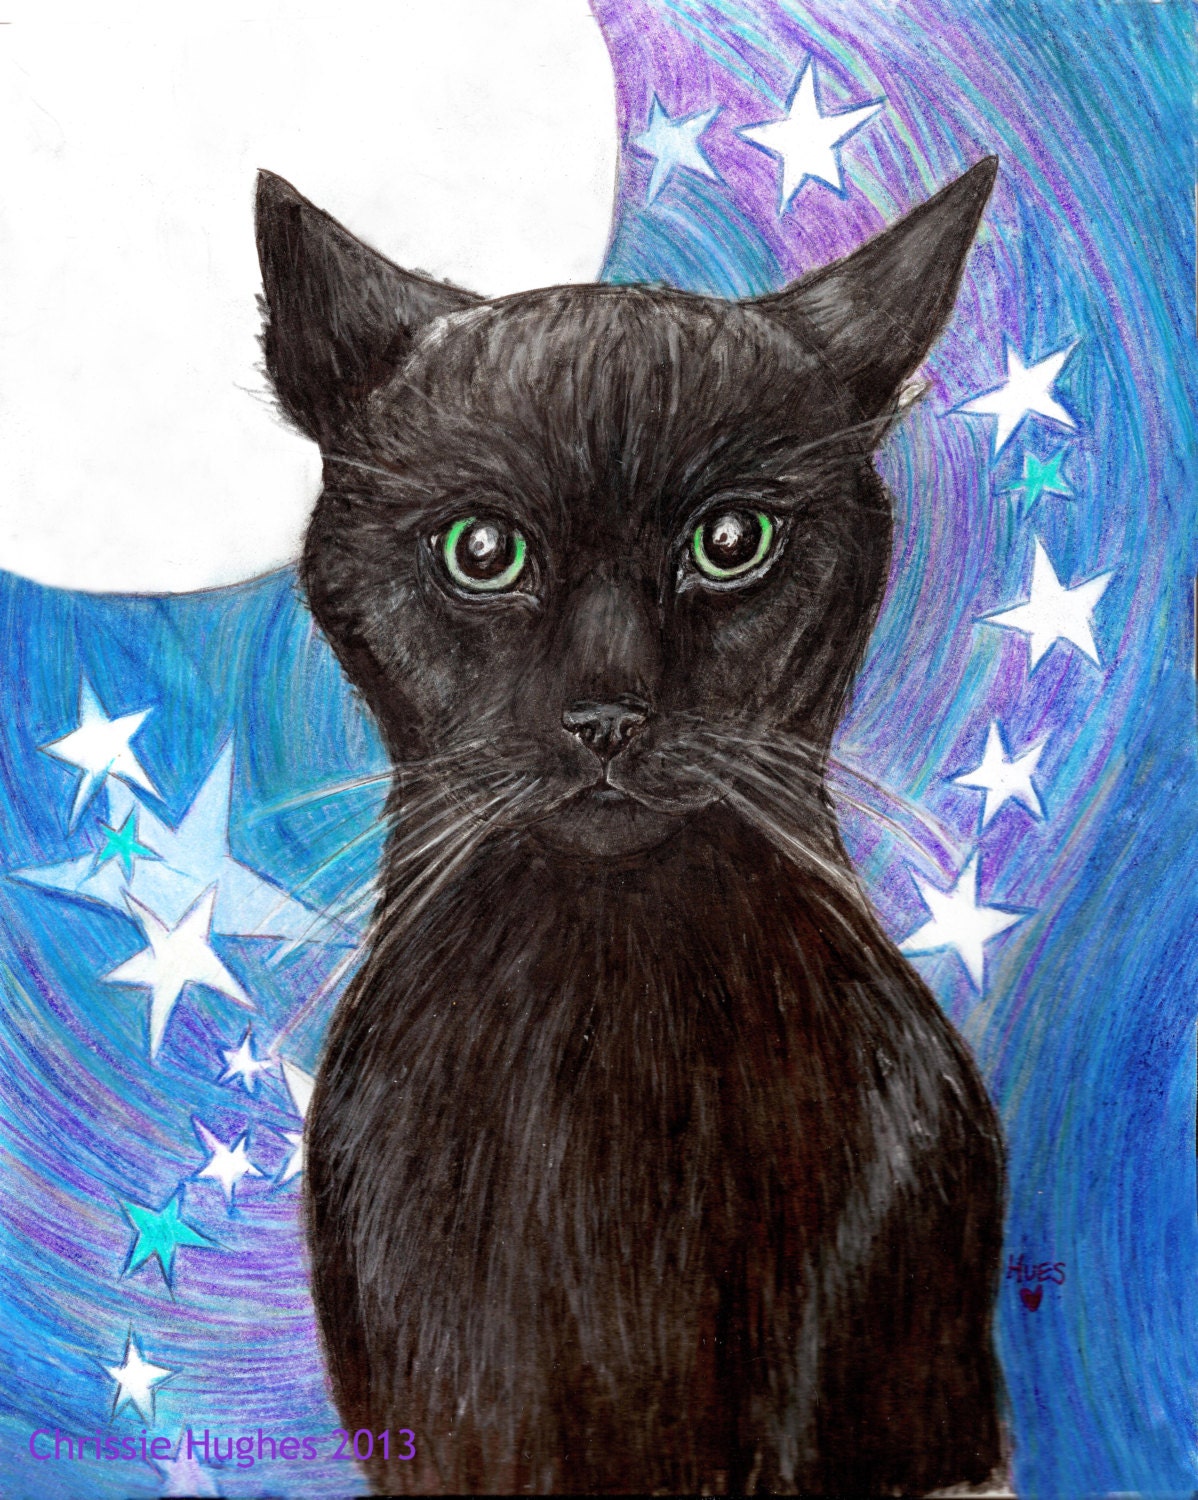 Moon Cat Art / Original Illustration by Maine Artist Chrissie Hughes 8x10" Drawing Feline Haunted Halloween Canvas mounted wicca stars - OldSewlVintage